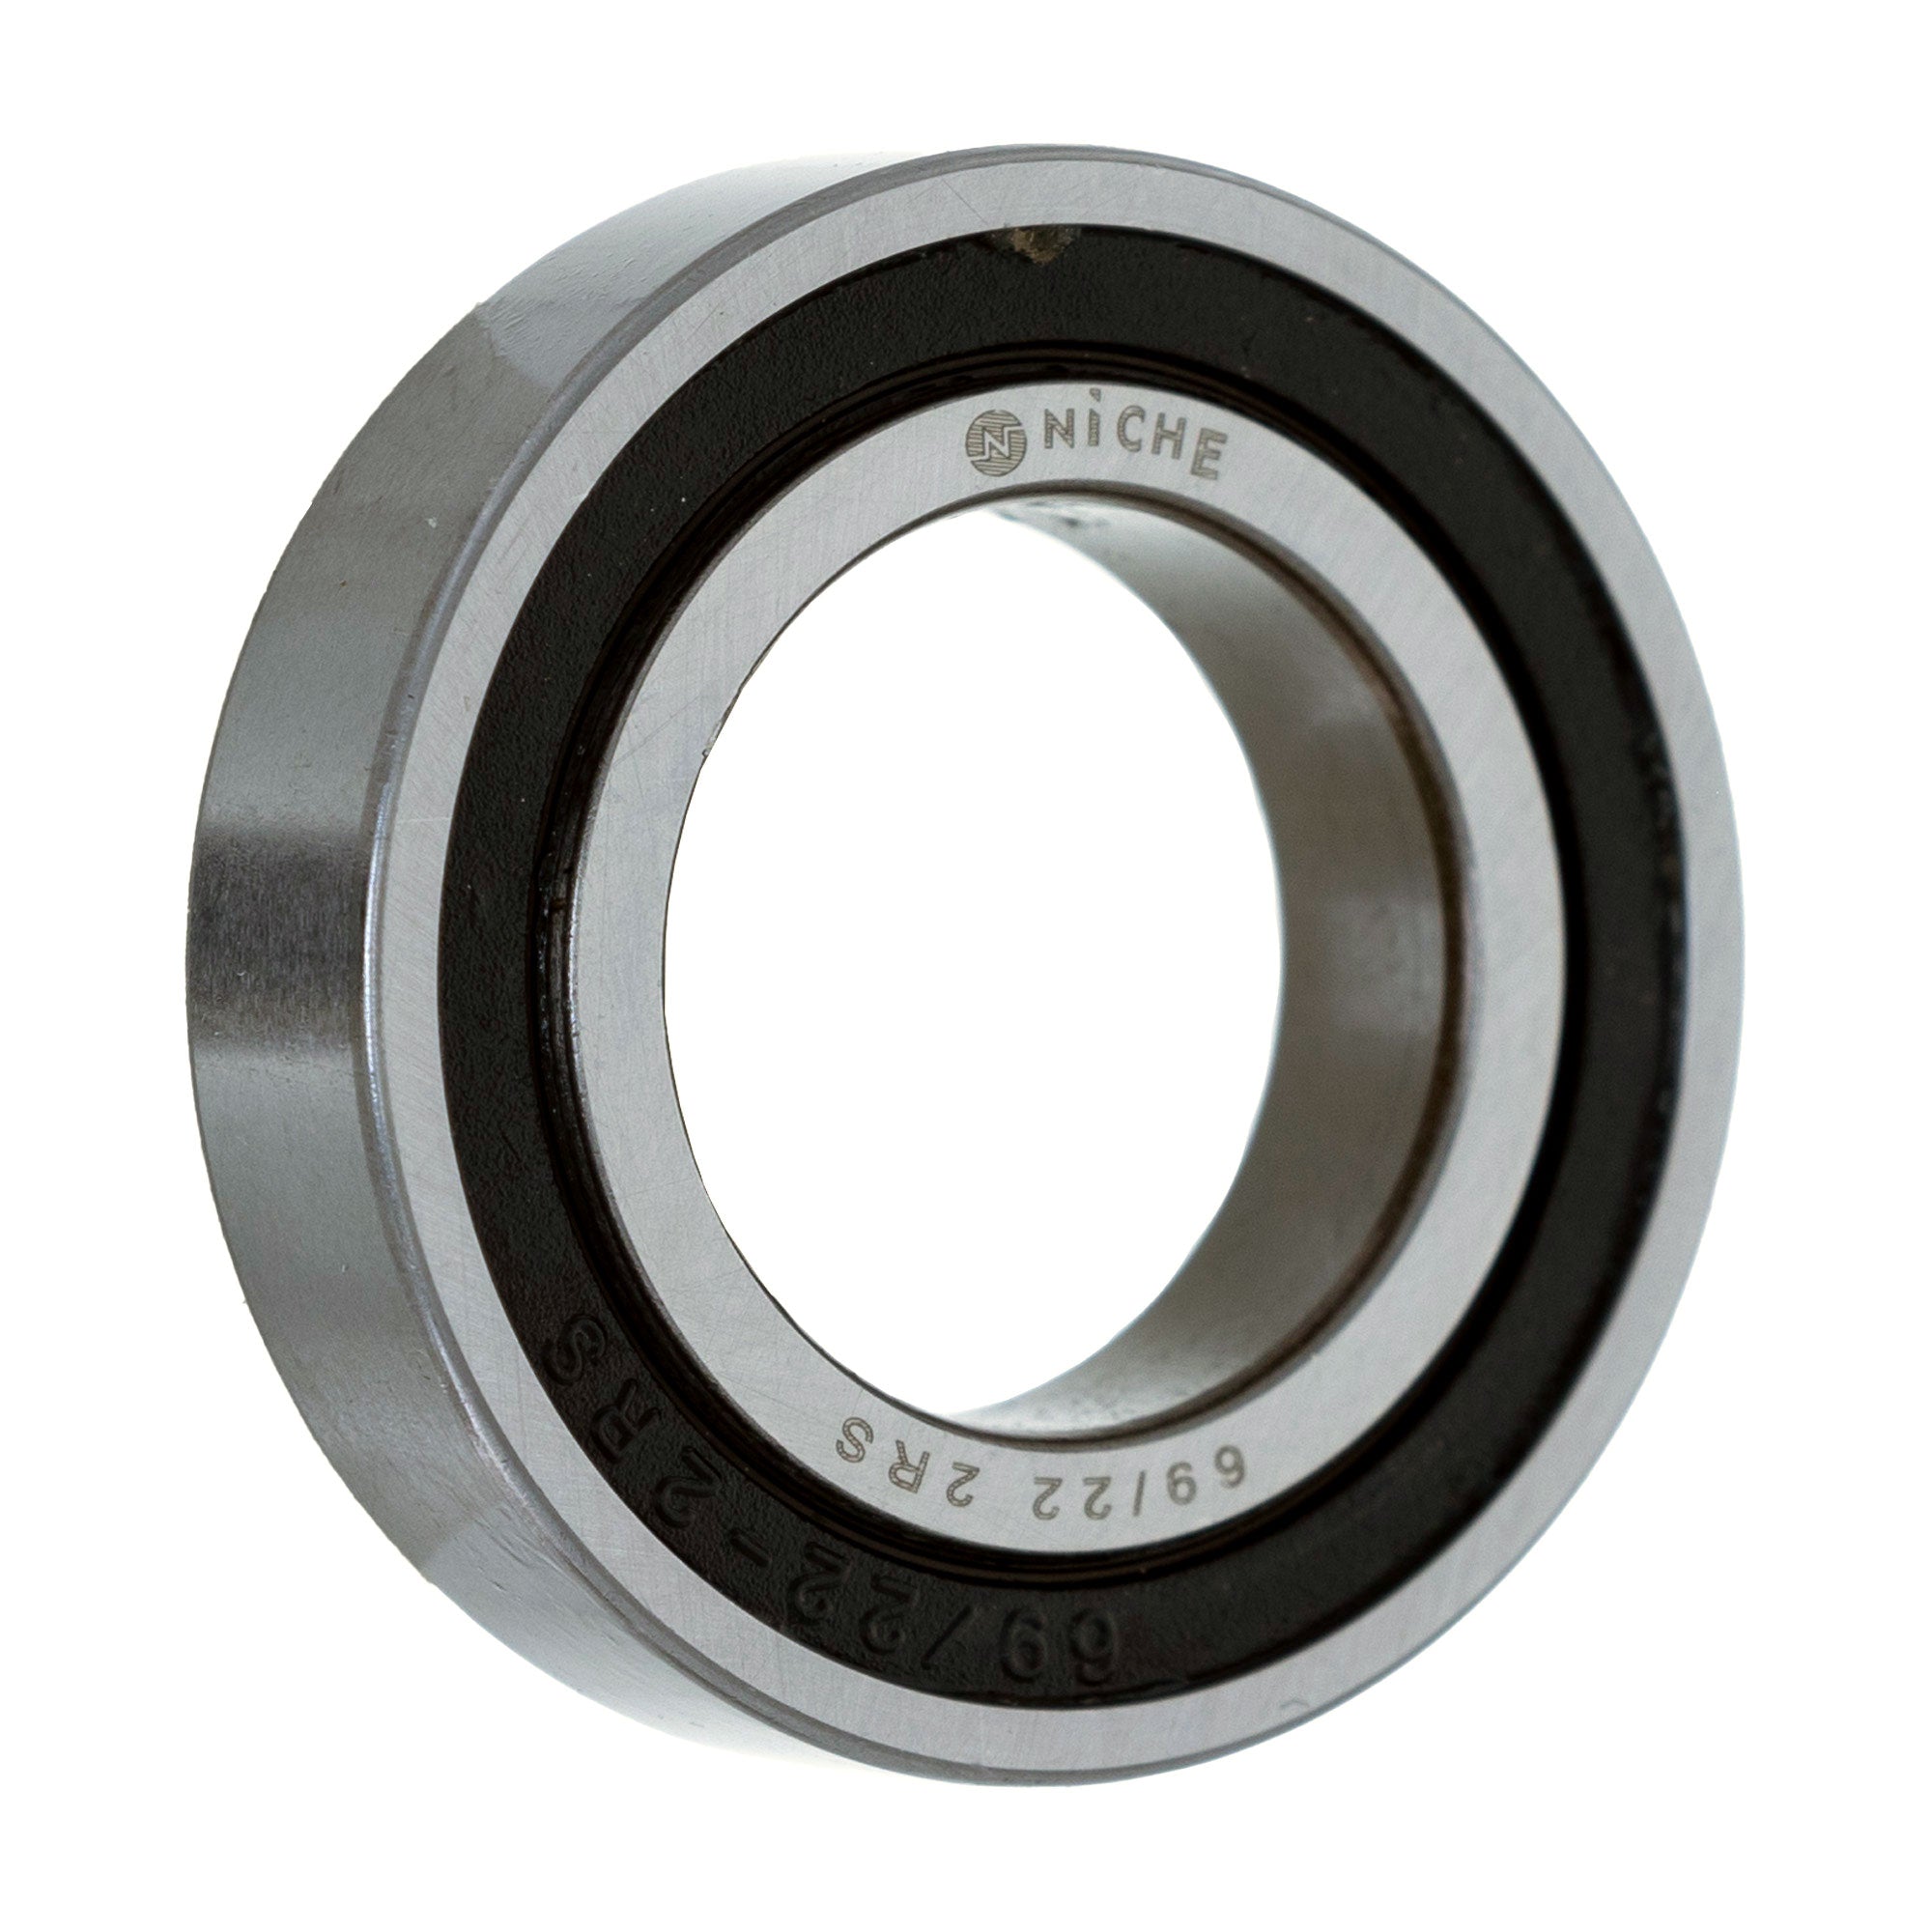 NICHE MK1009232 Bearing & Seal Kit for zOTHER YZ450FX YZ450F